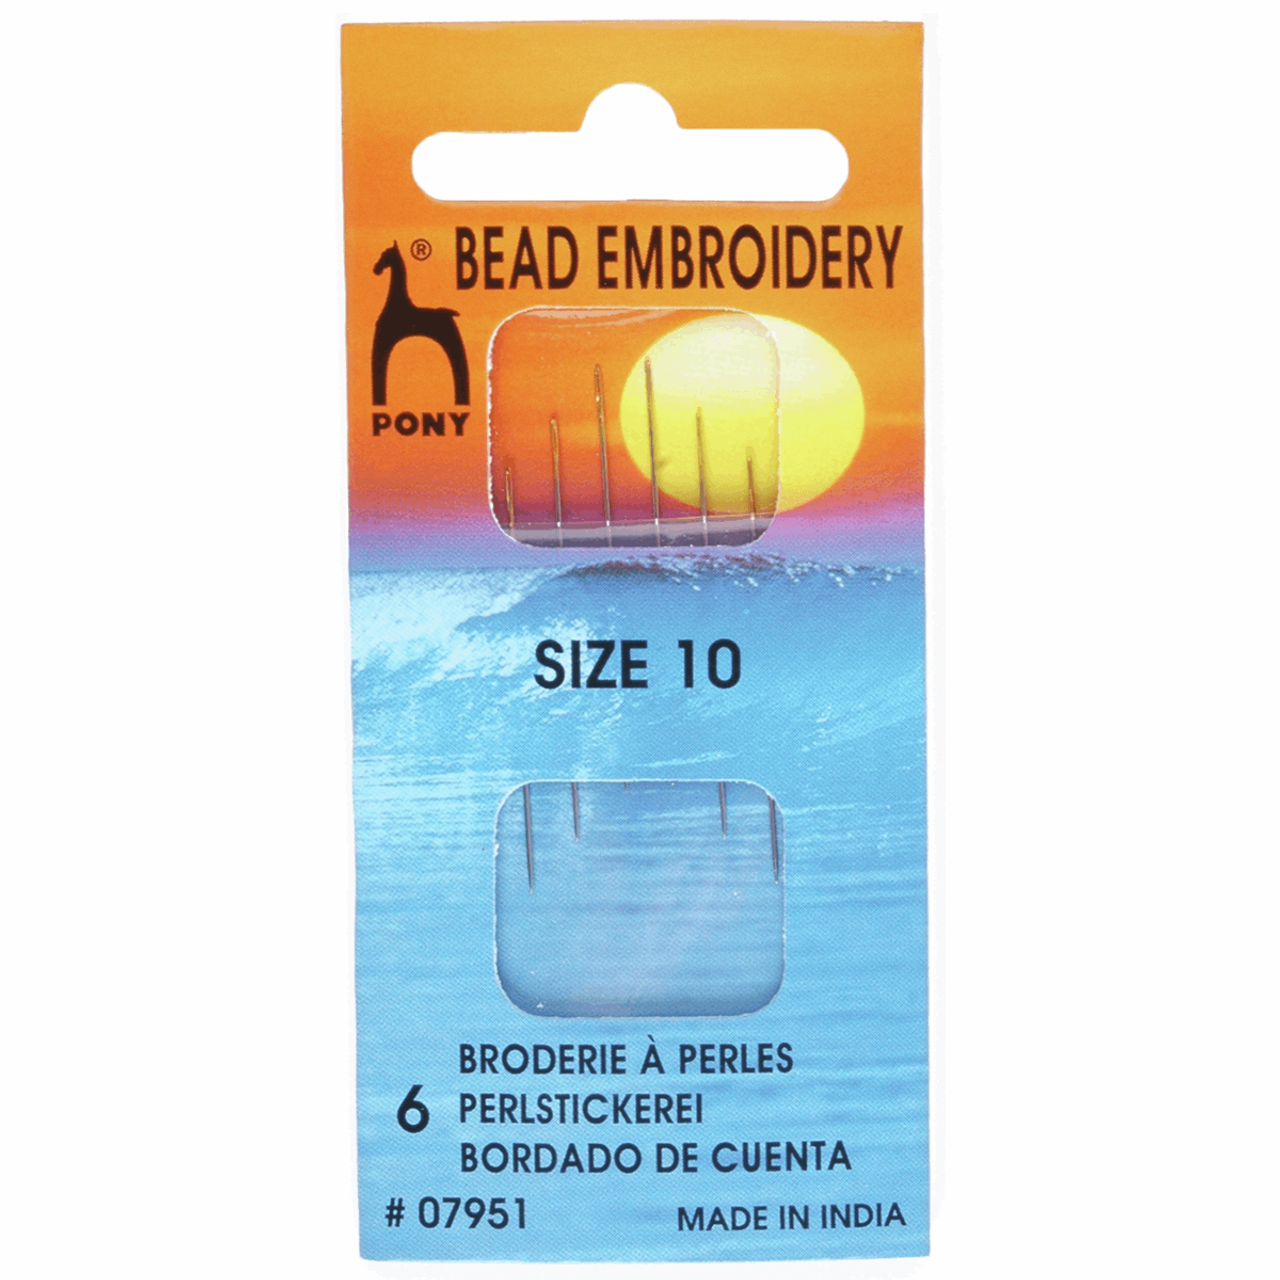 Hand Sewing Needles - Bead Embroidery - Size 10